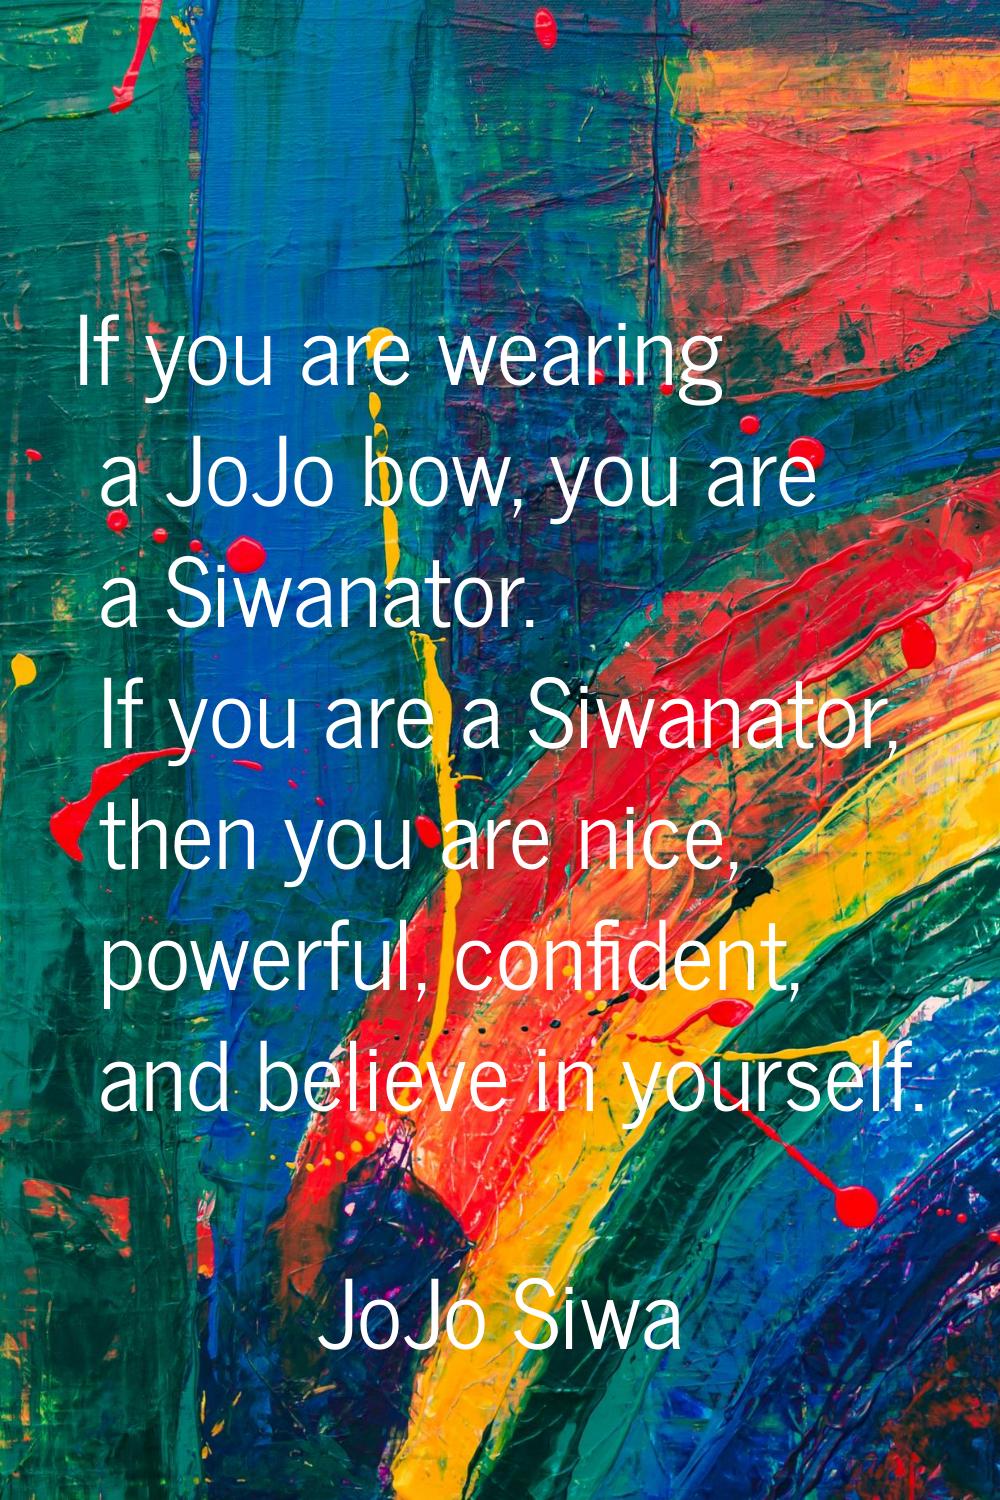 If you are wearing a JoJo bow, you are a Siwanator. If you are a Siwanator, then you are nice, powe